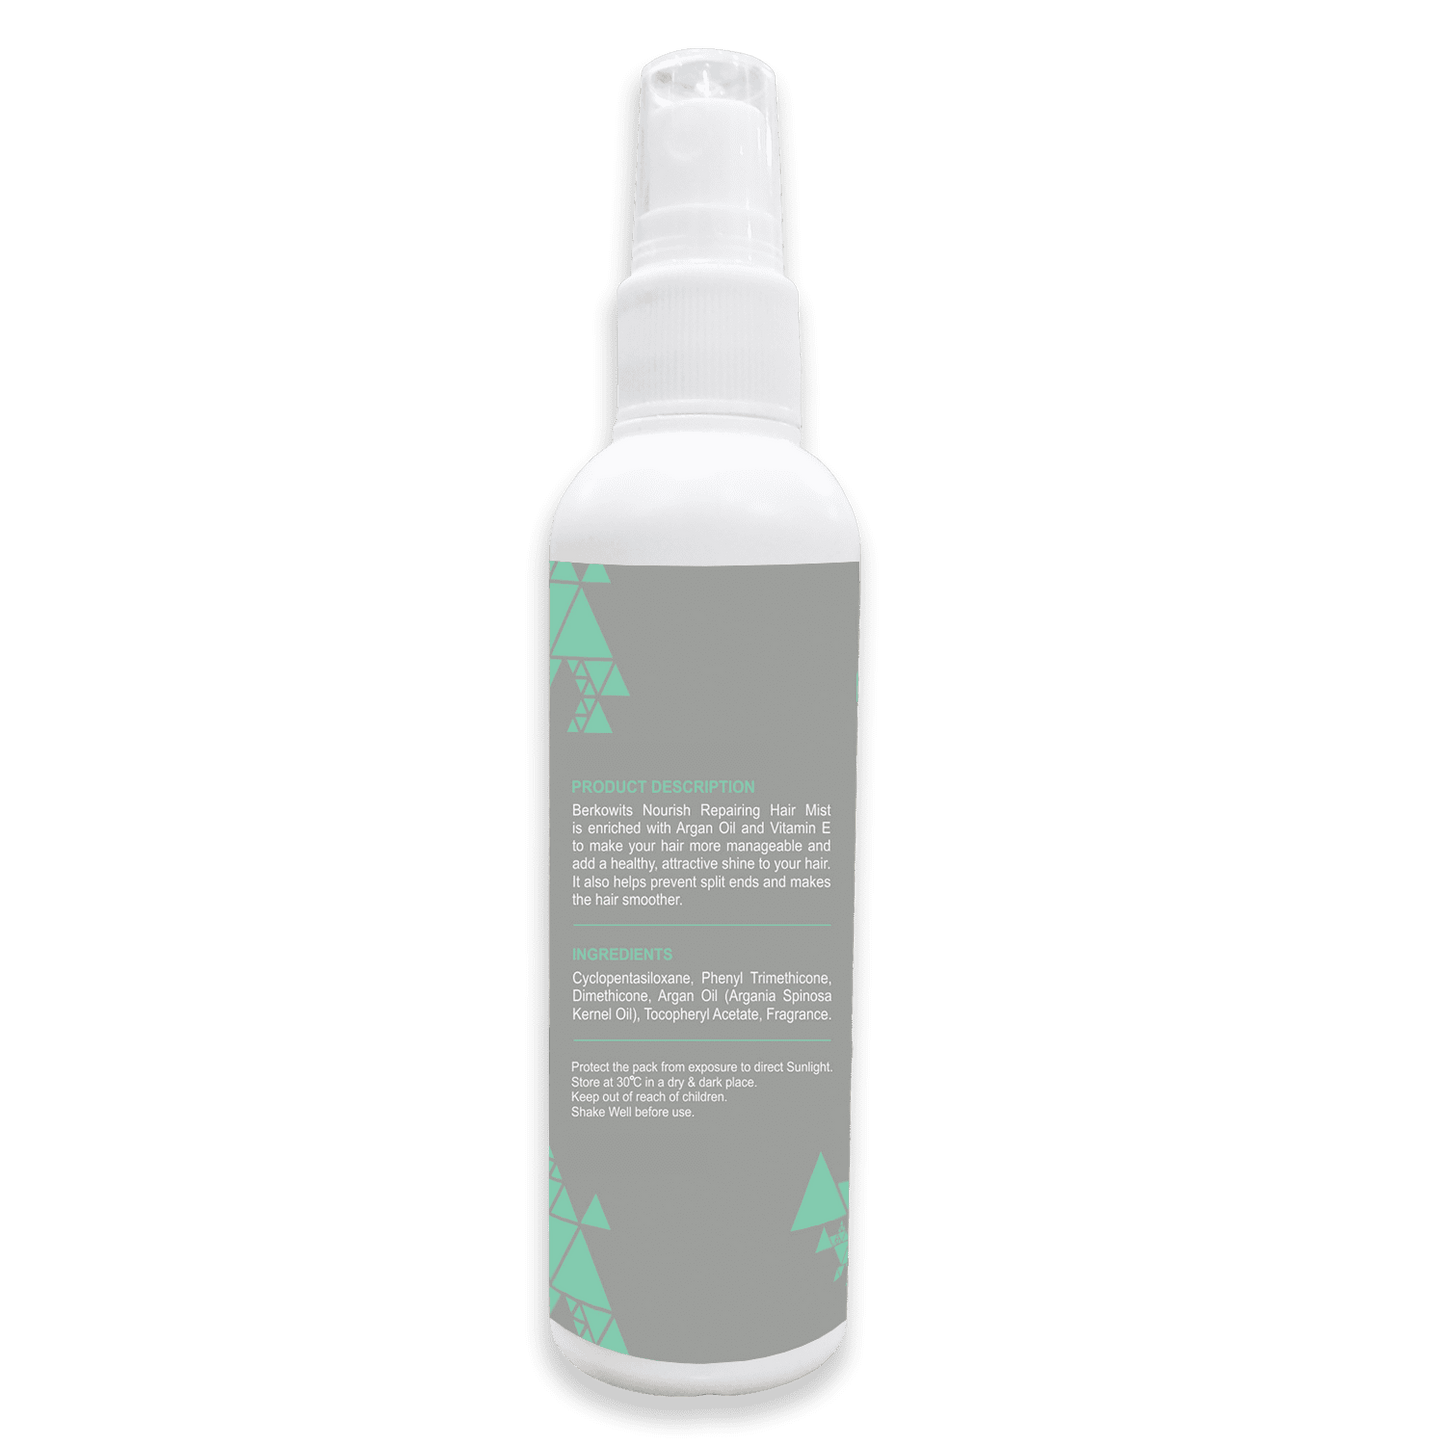 Berkowits Nourish Hair Mist With Argan Oil And Vitamin E, 100 Ml